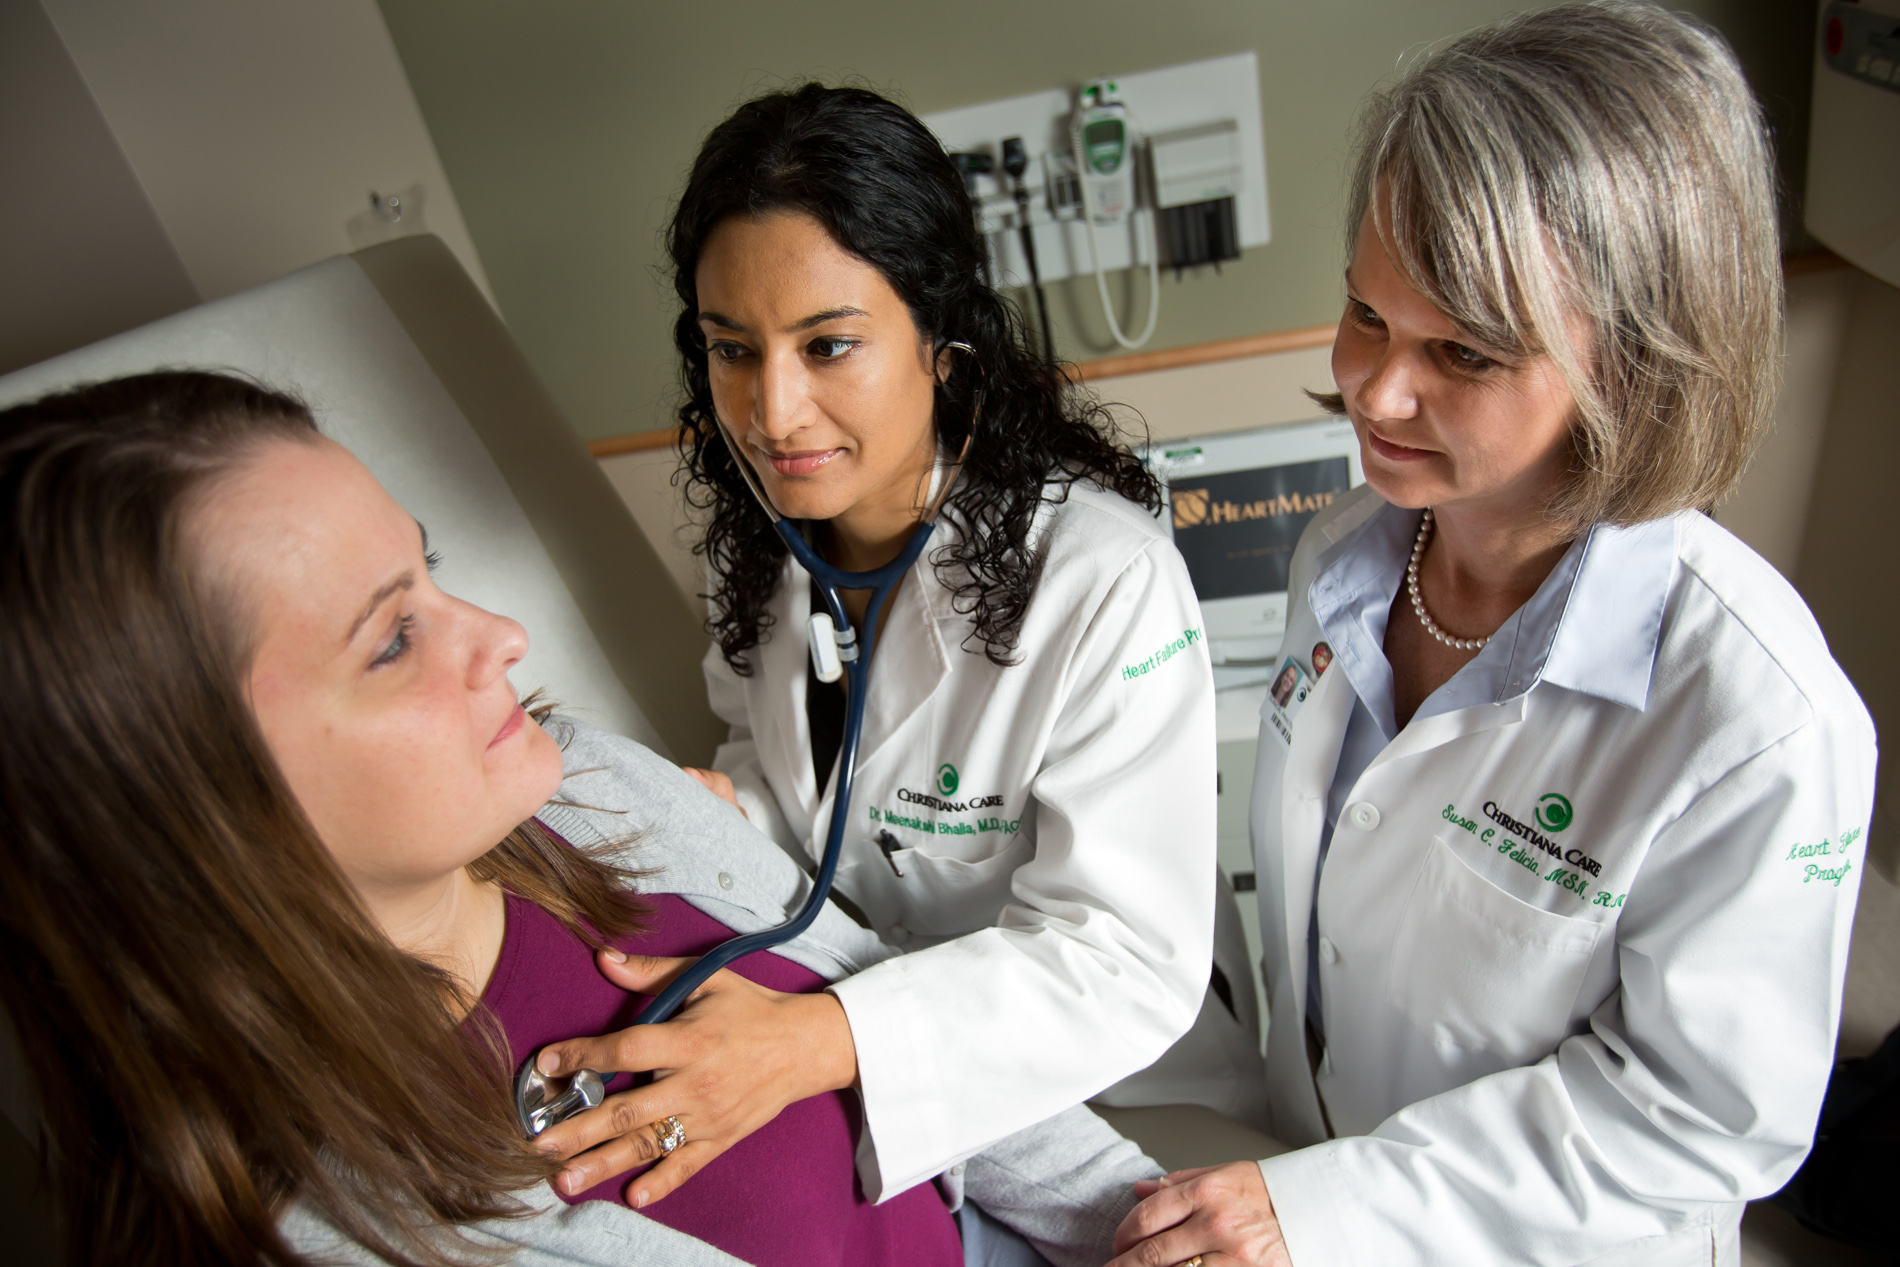 Meenakshi A. Bhalla, M.D., and Susan Felicia, MSN, PNP-C, CHFN, examine a patient at the Christiana Care Center for Heart & Vascular Health.